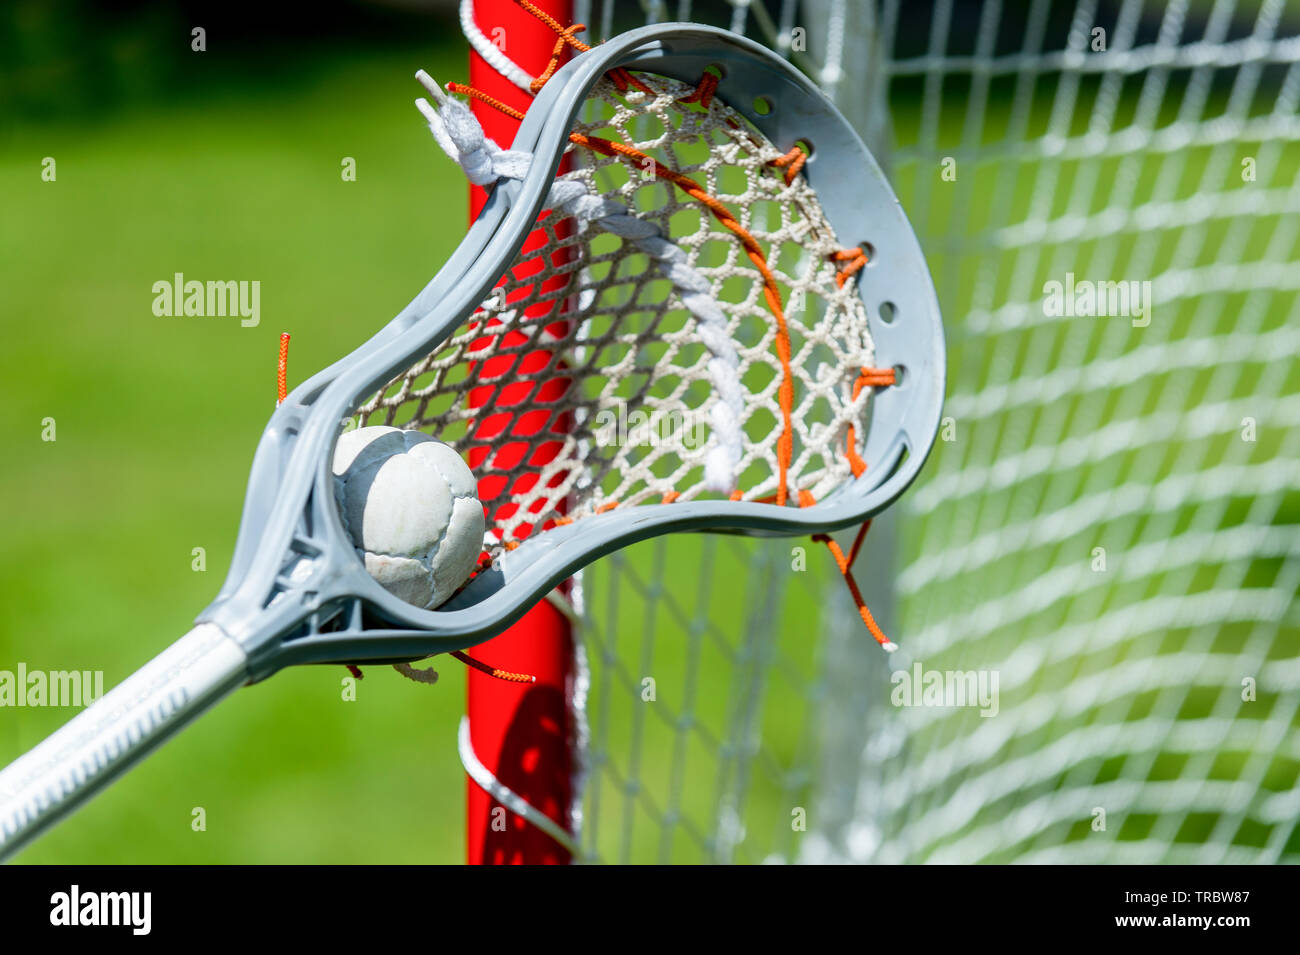 Lacrosse Sticks With Ball Male Sports High-Res Vector Graphic